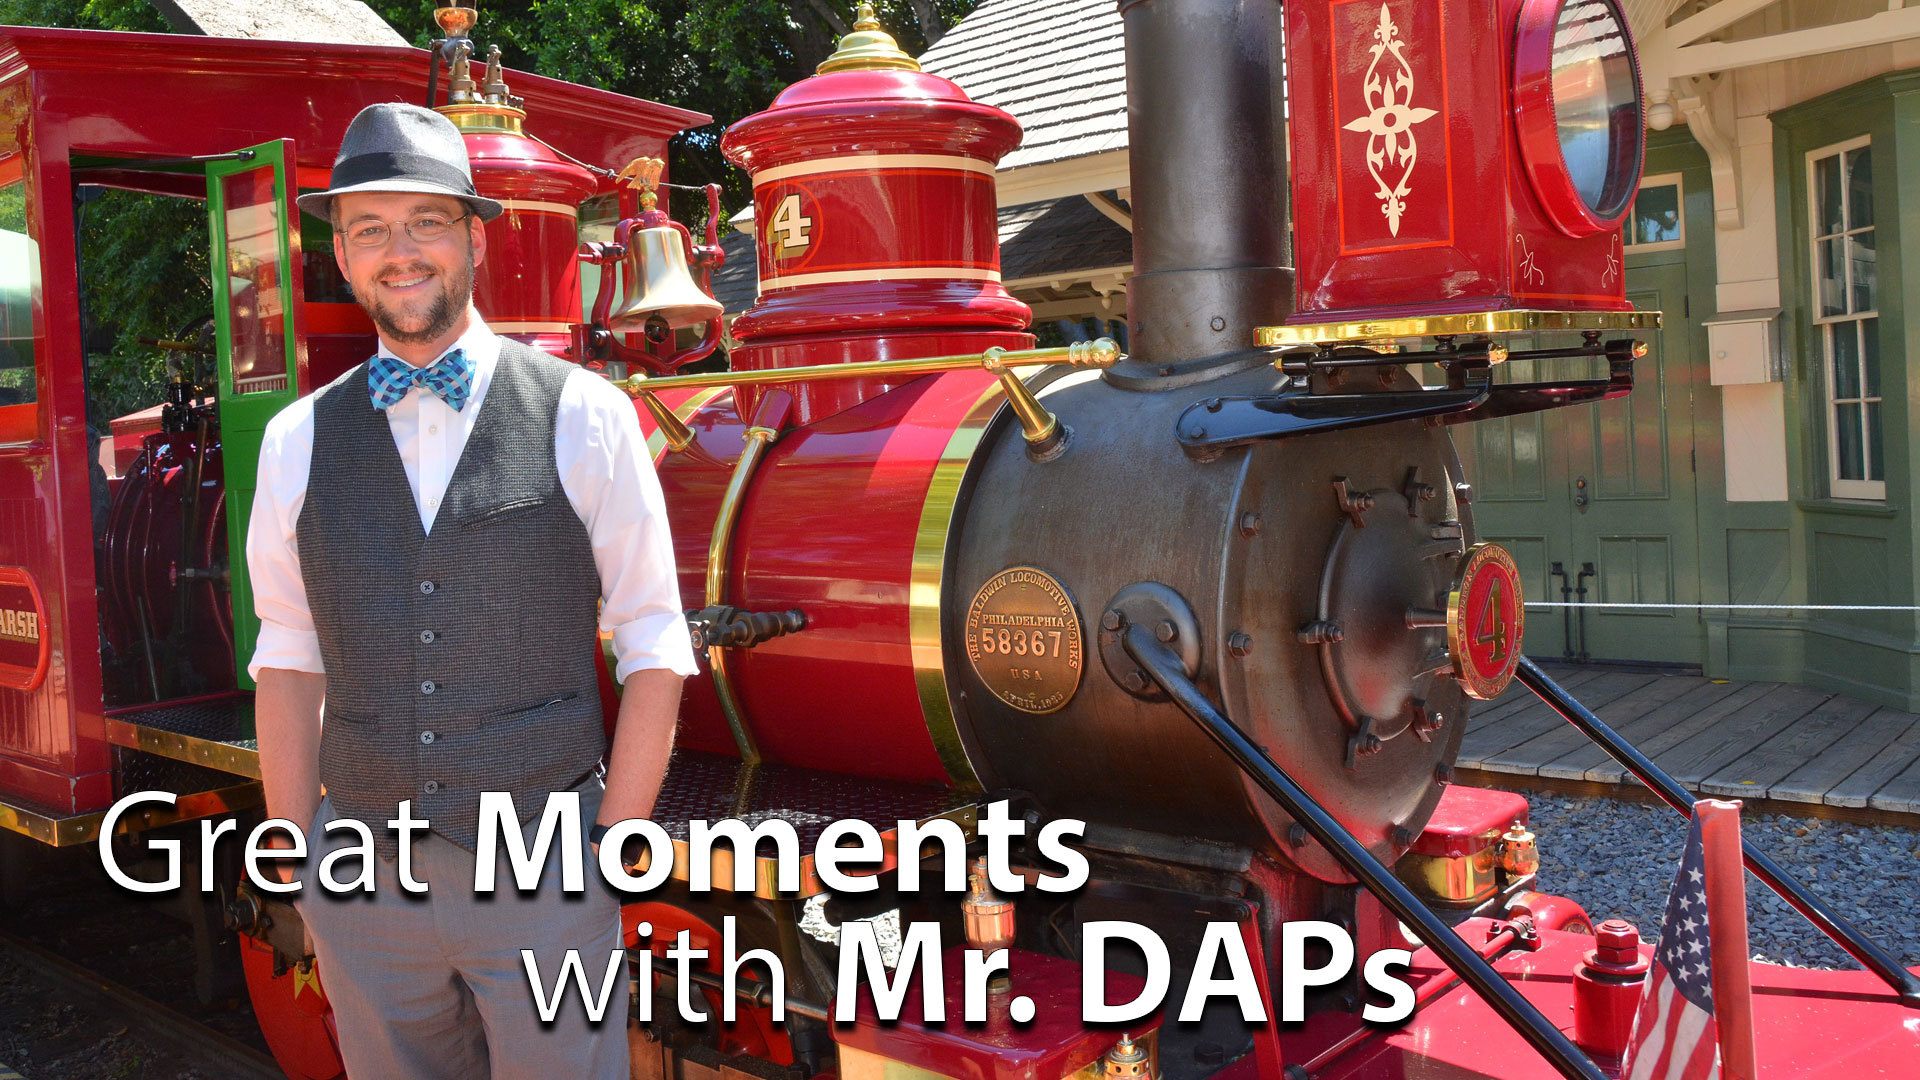 Halloween, Cars, Star Wars, and More – Great Moments with Mr. DAPs